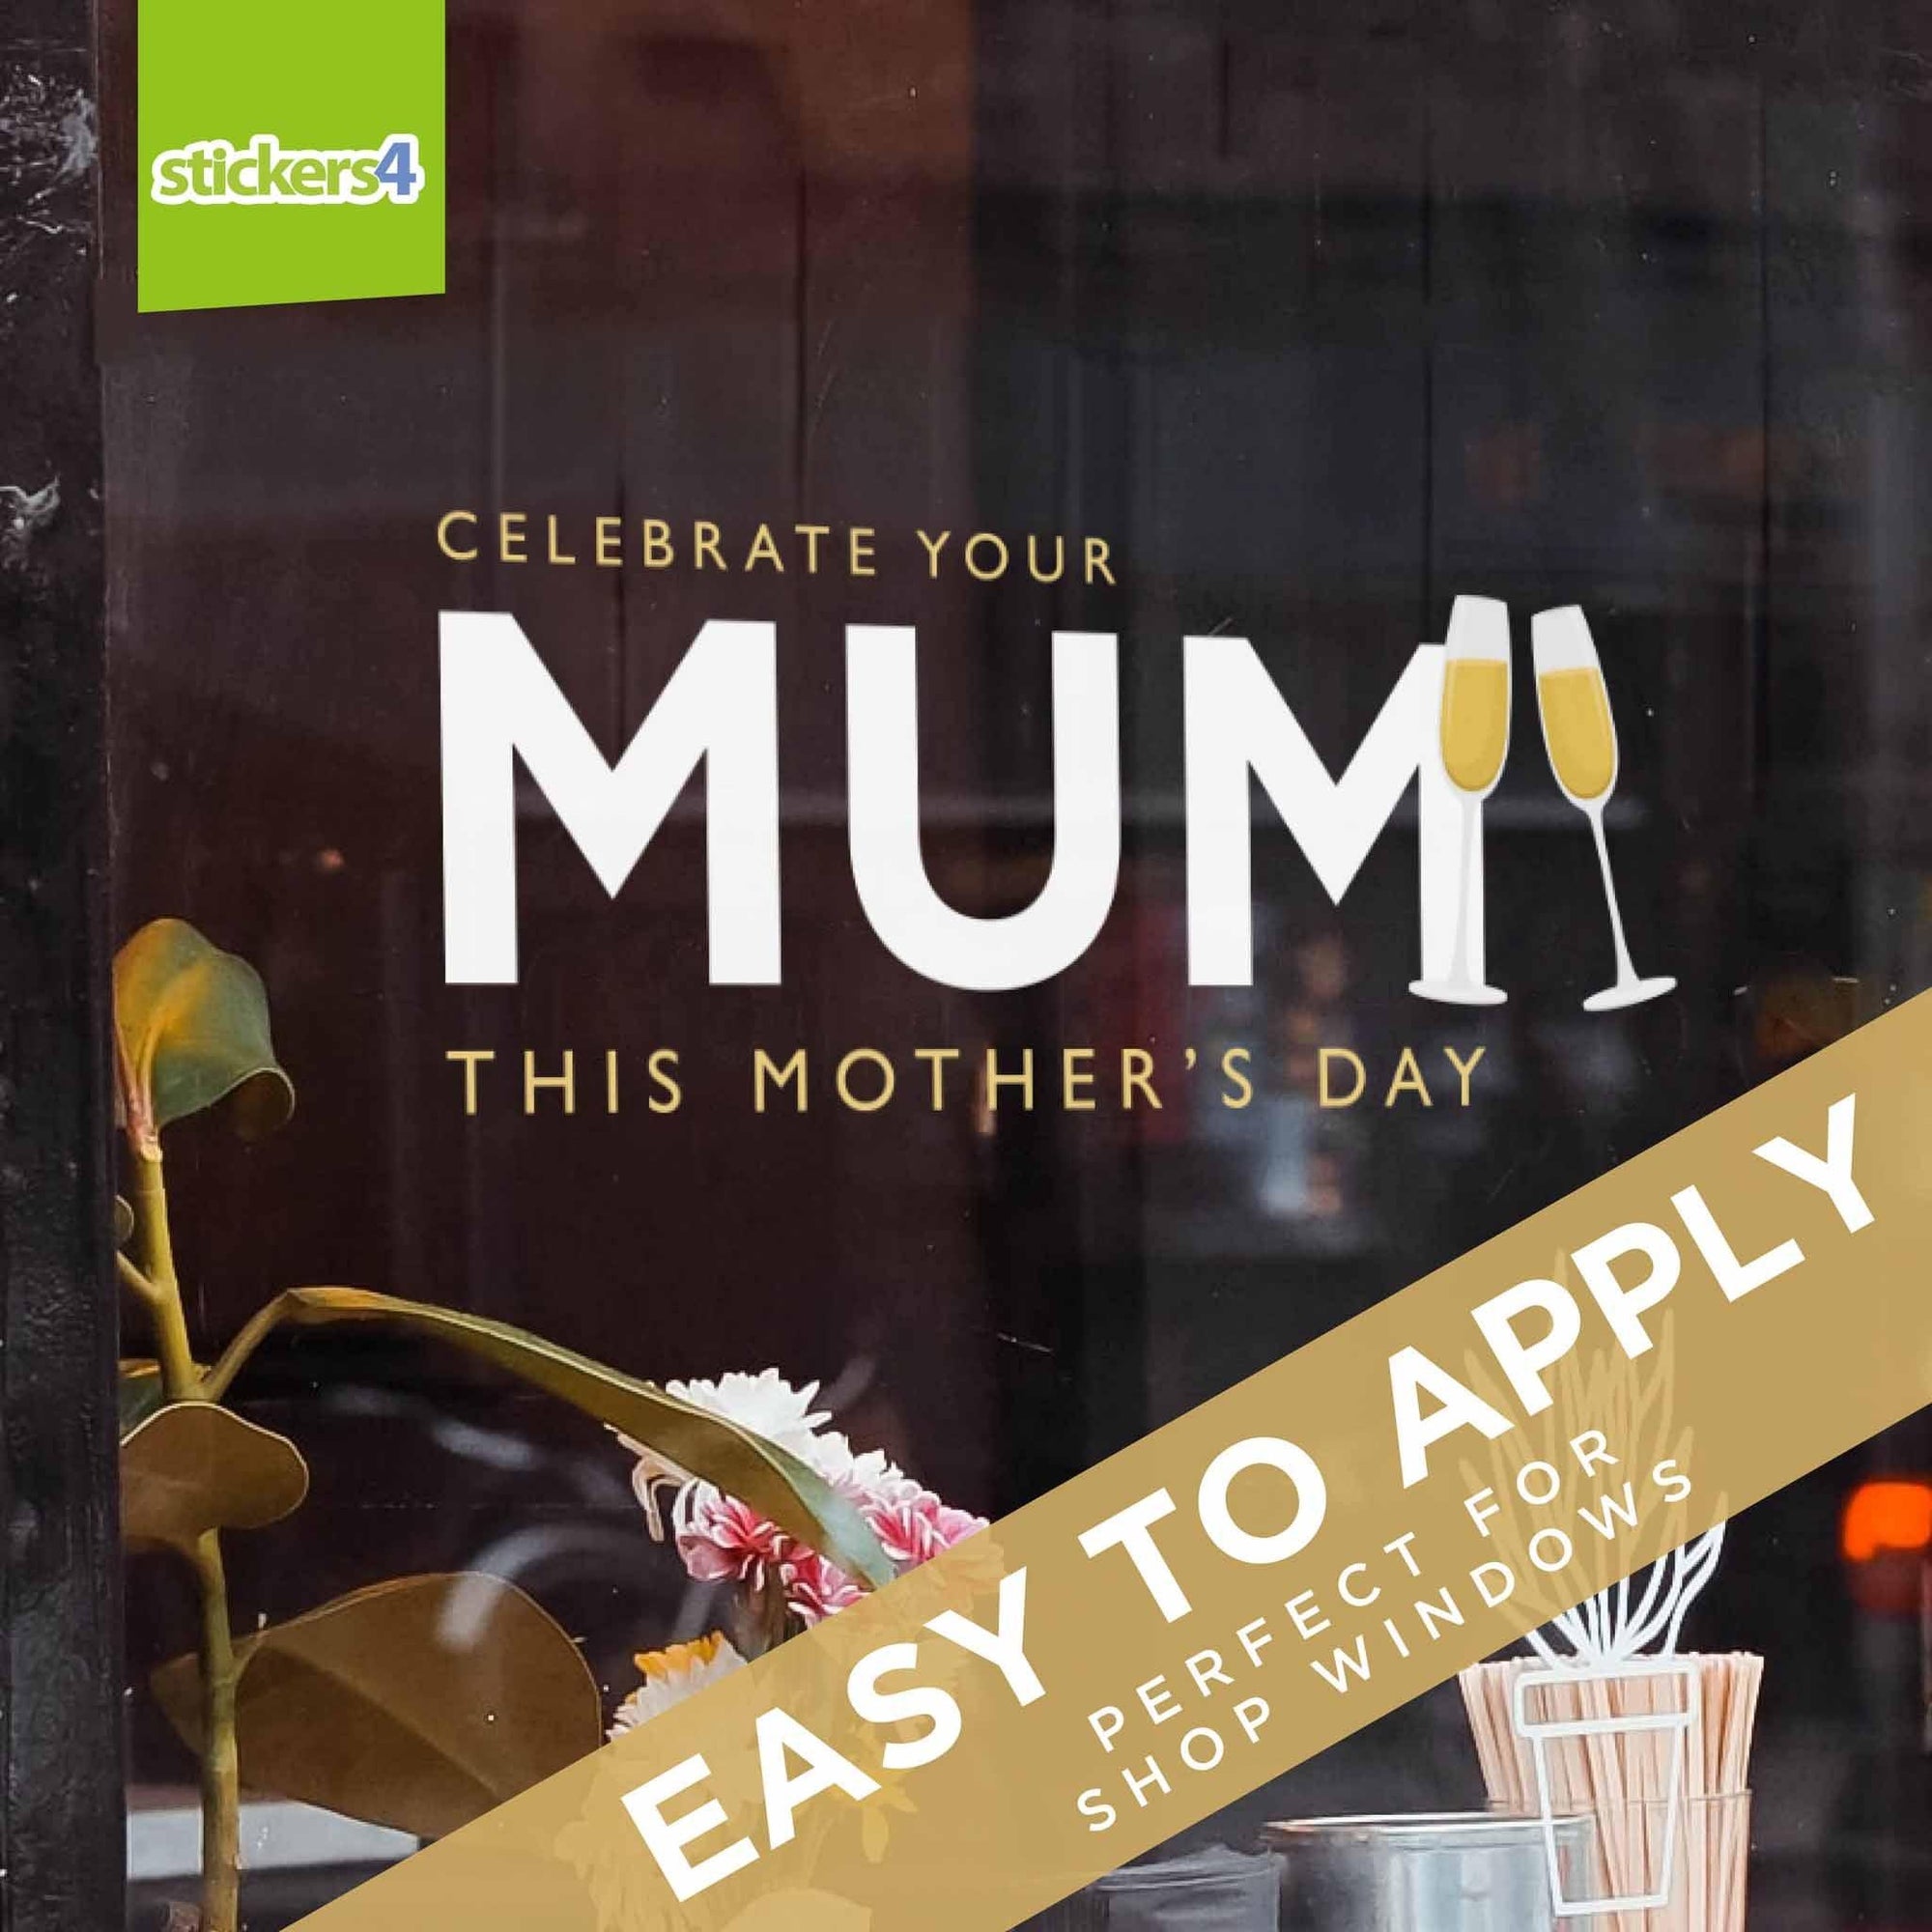 Celebrate Your Mum Window Sticker Mother's Day Display